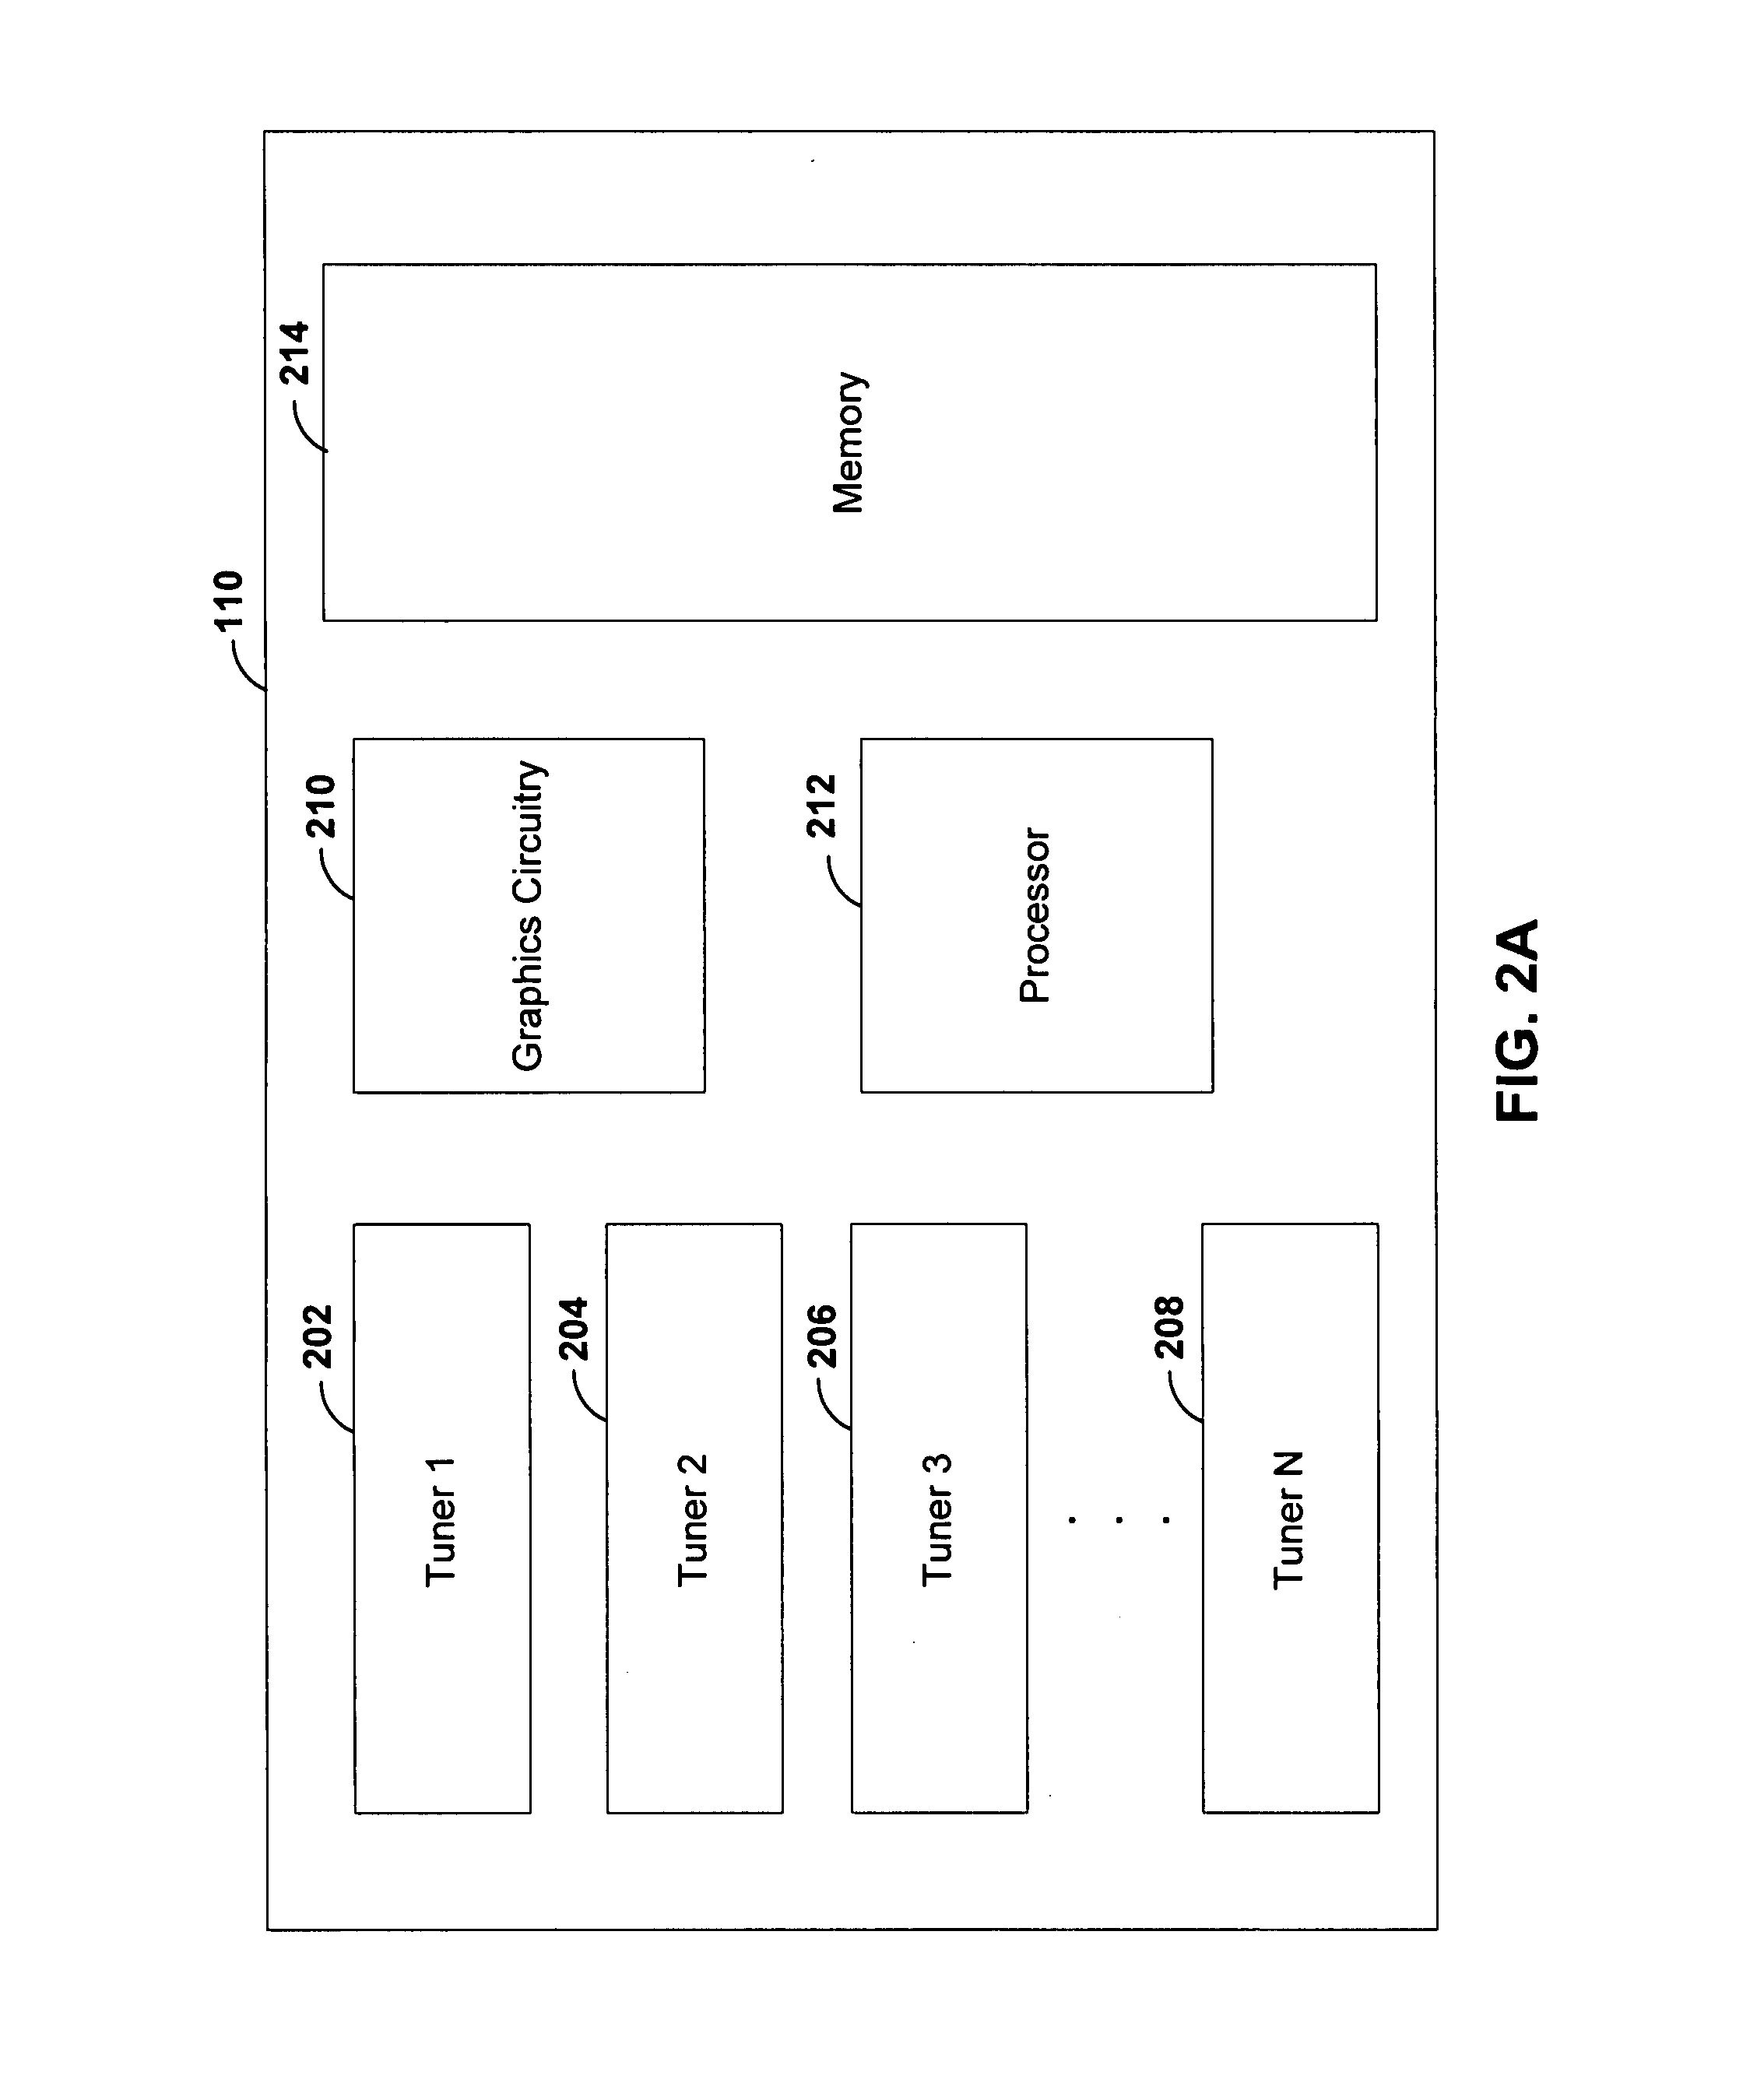 Systems and methods for providing enhanced sports watching media guidance